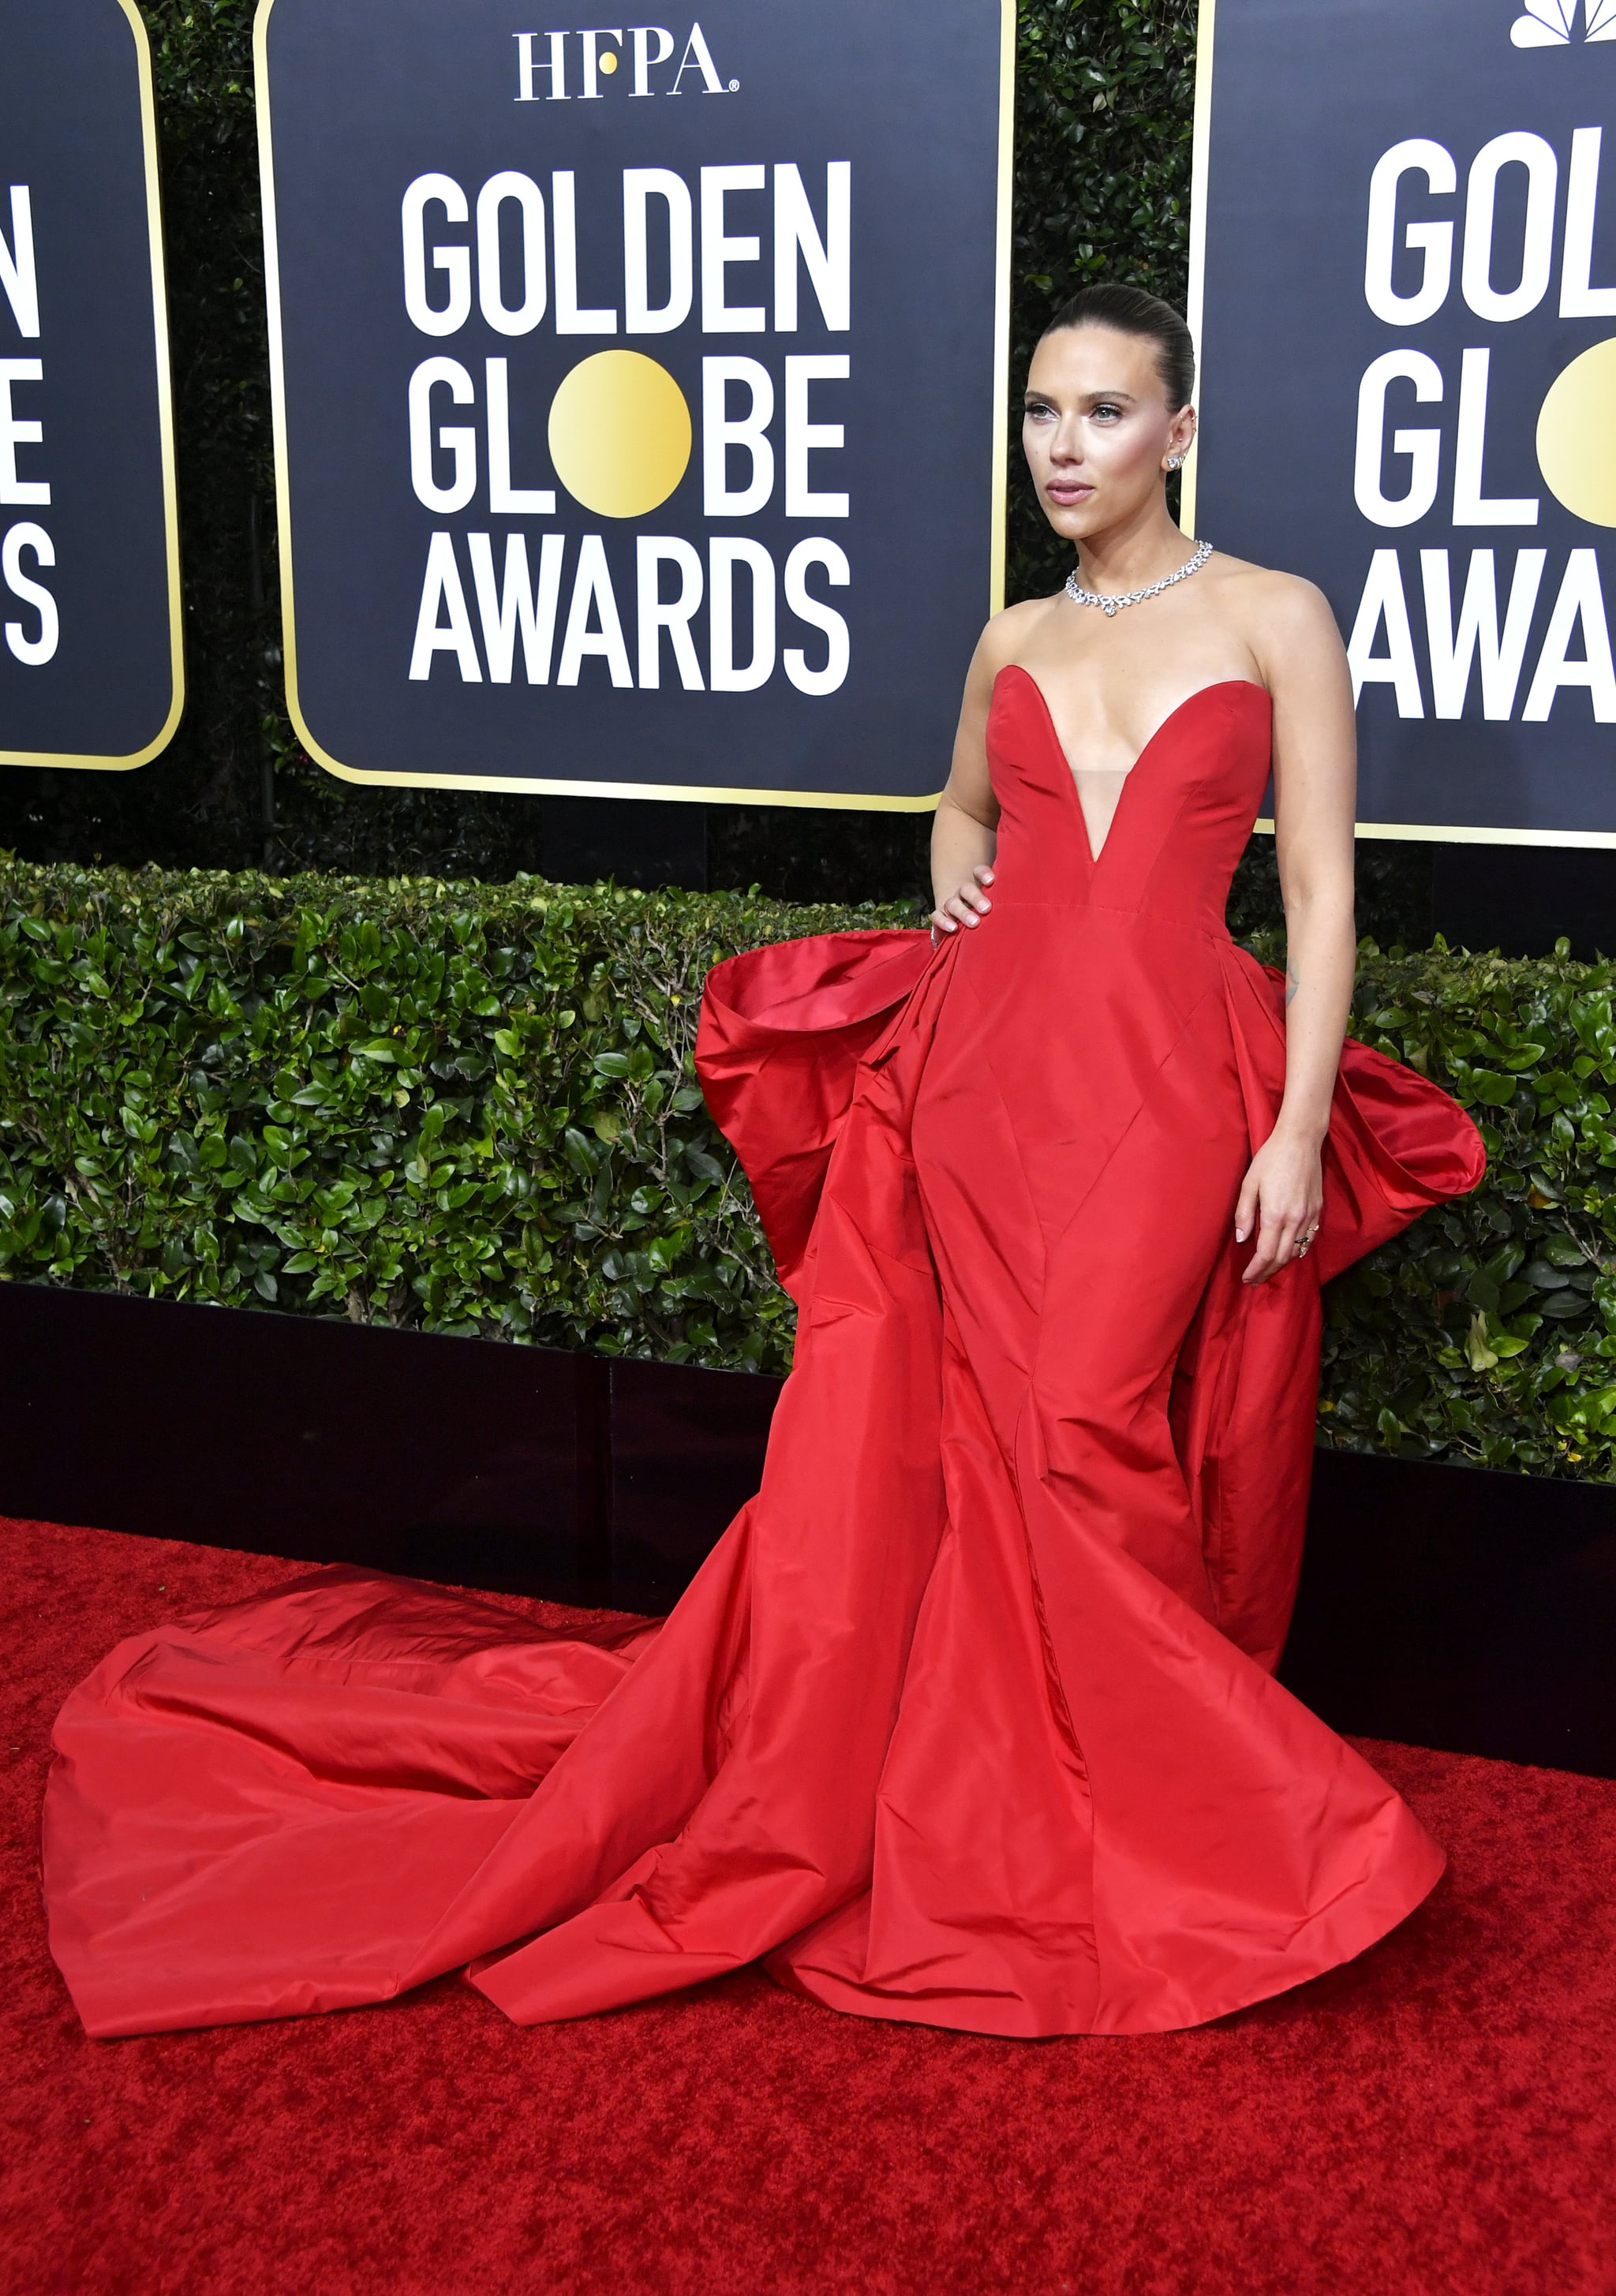 Scarlett Johansson At The 2020 Golden Globes The Sexiest Dresses